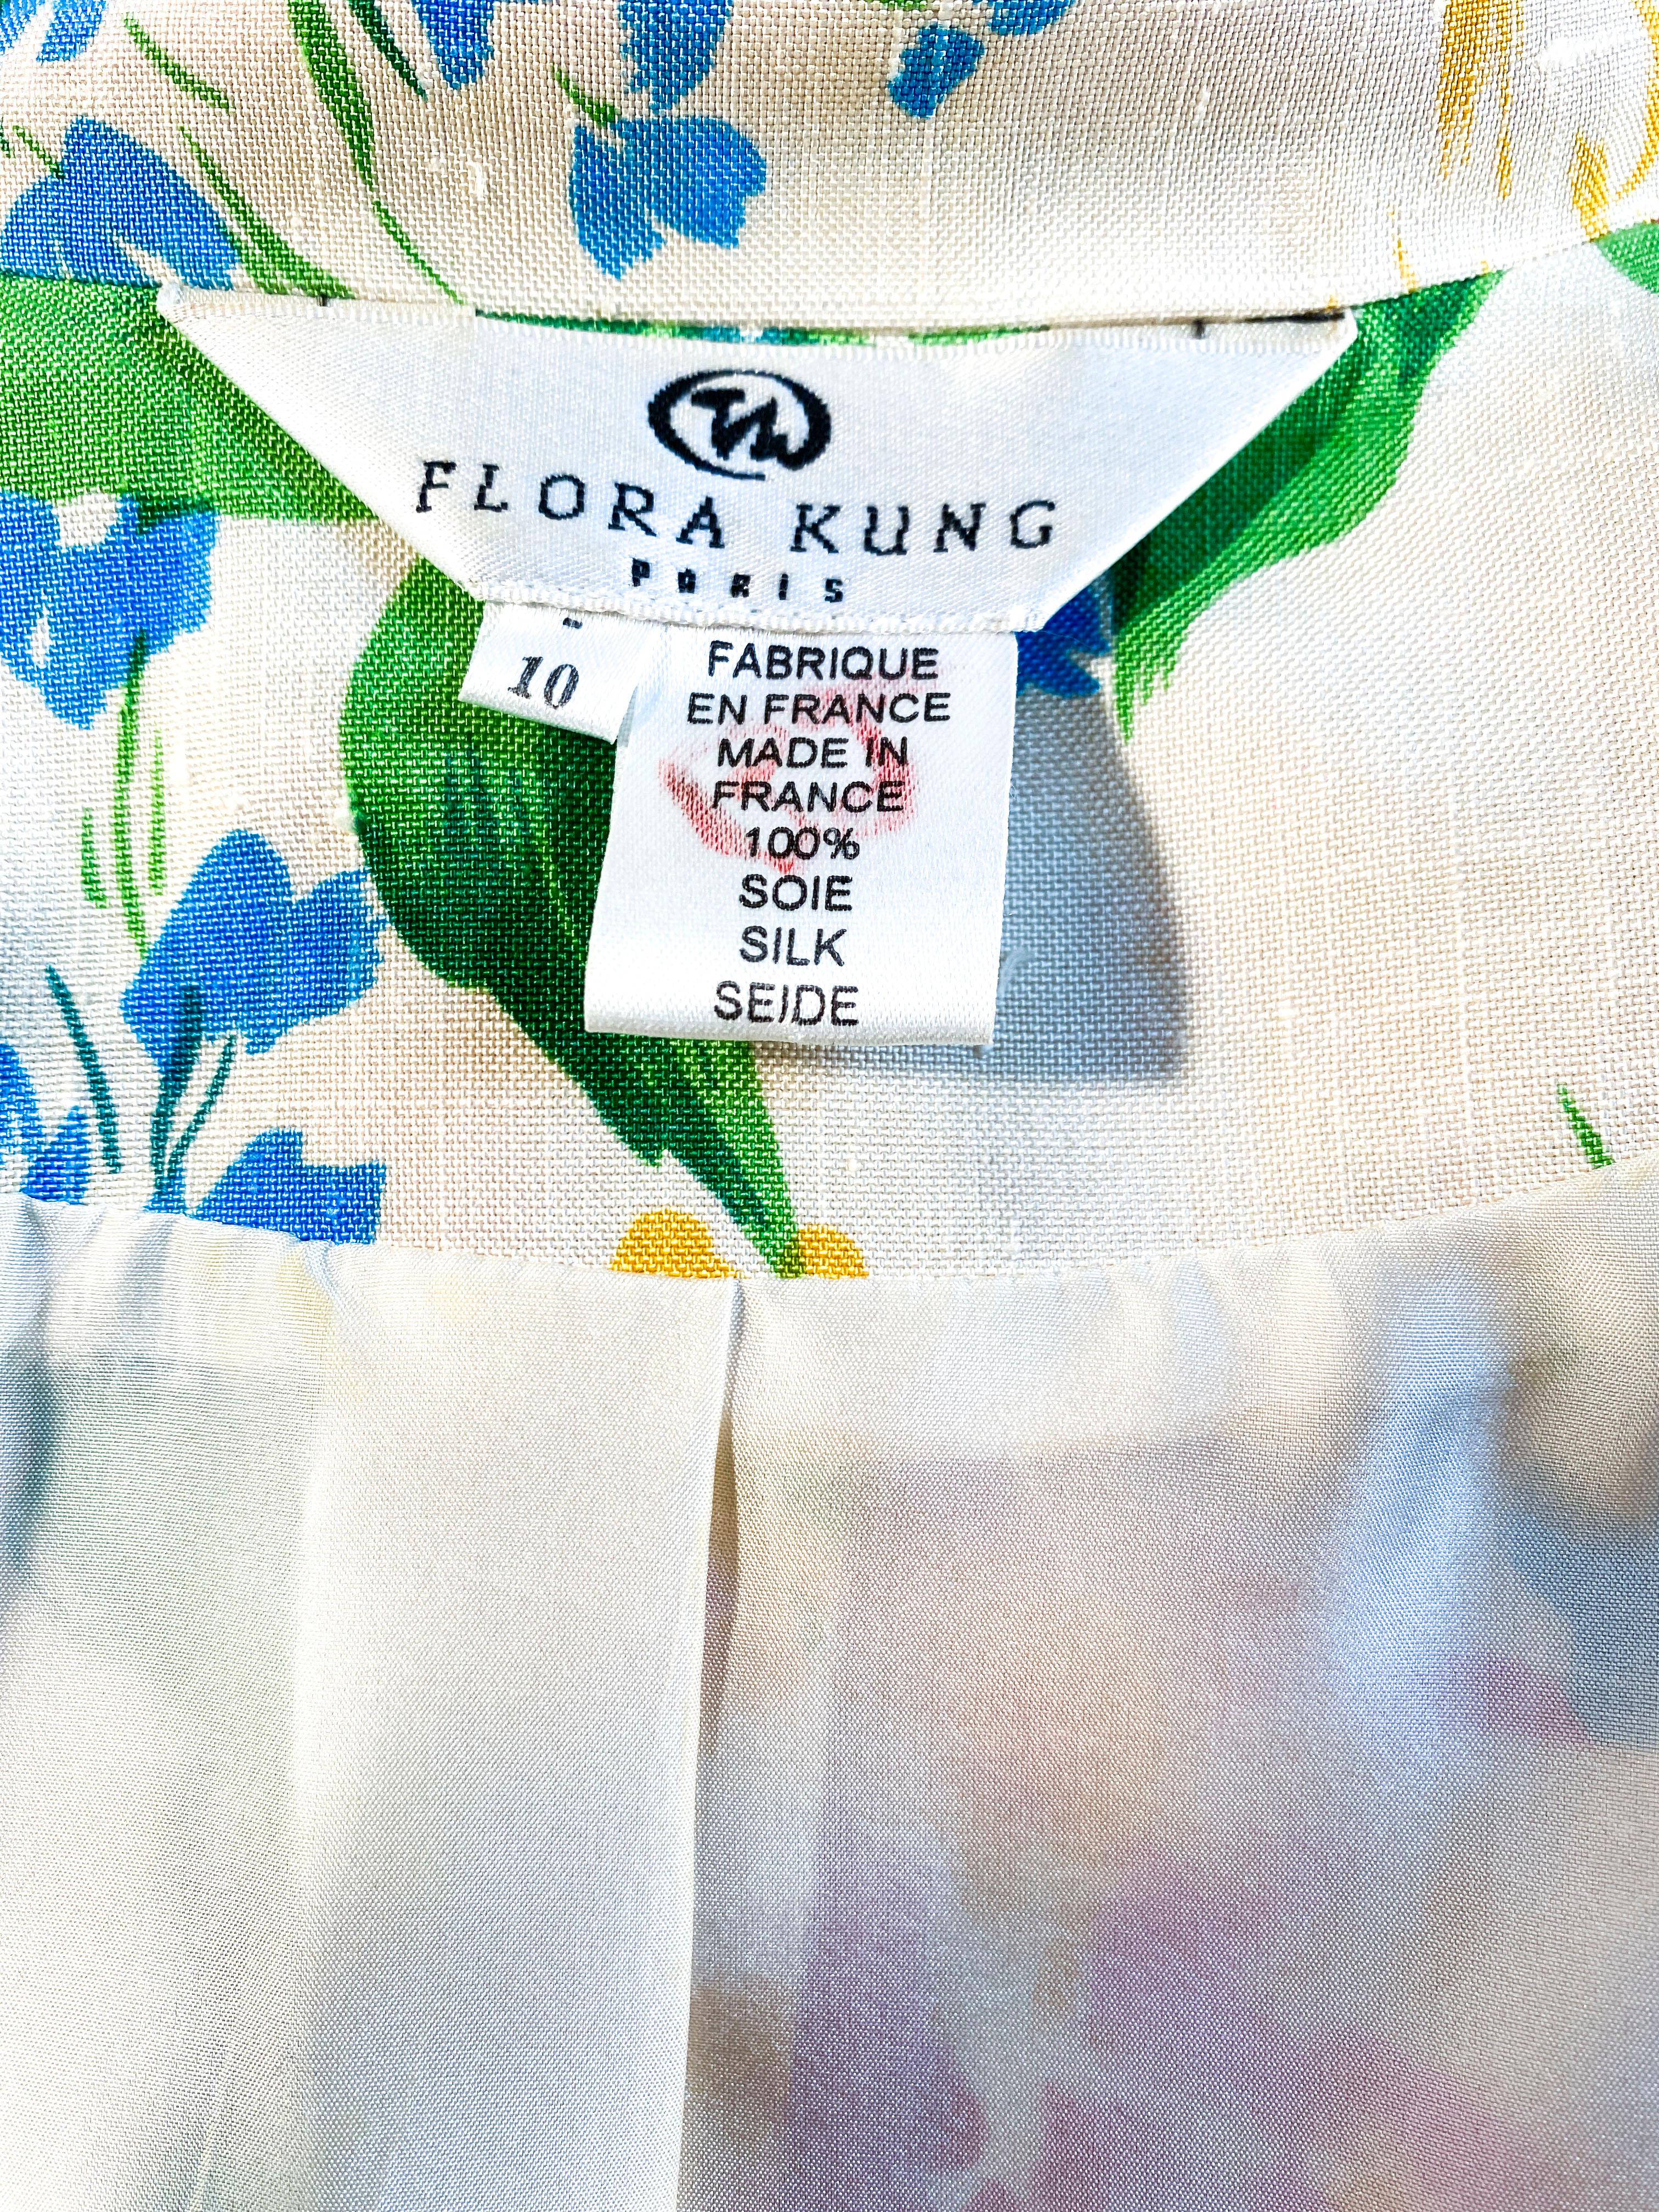 1990s Flora Kung Floral Printed Silk Suit For Sale 1